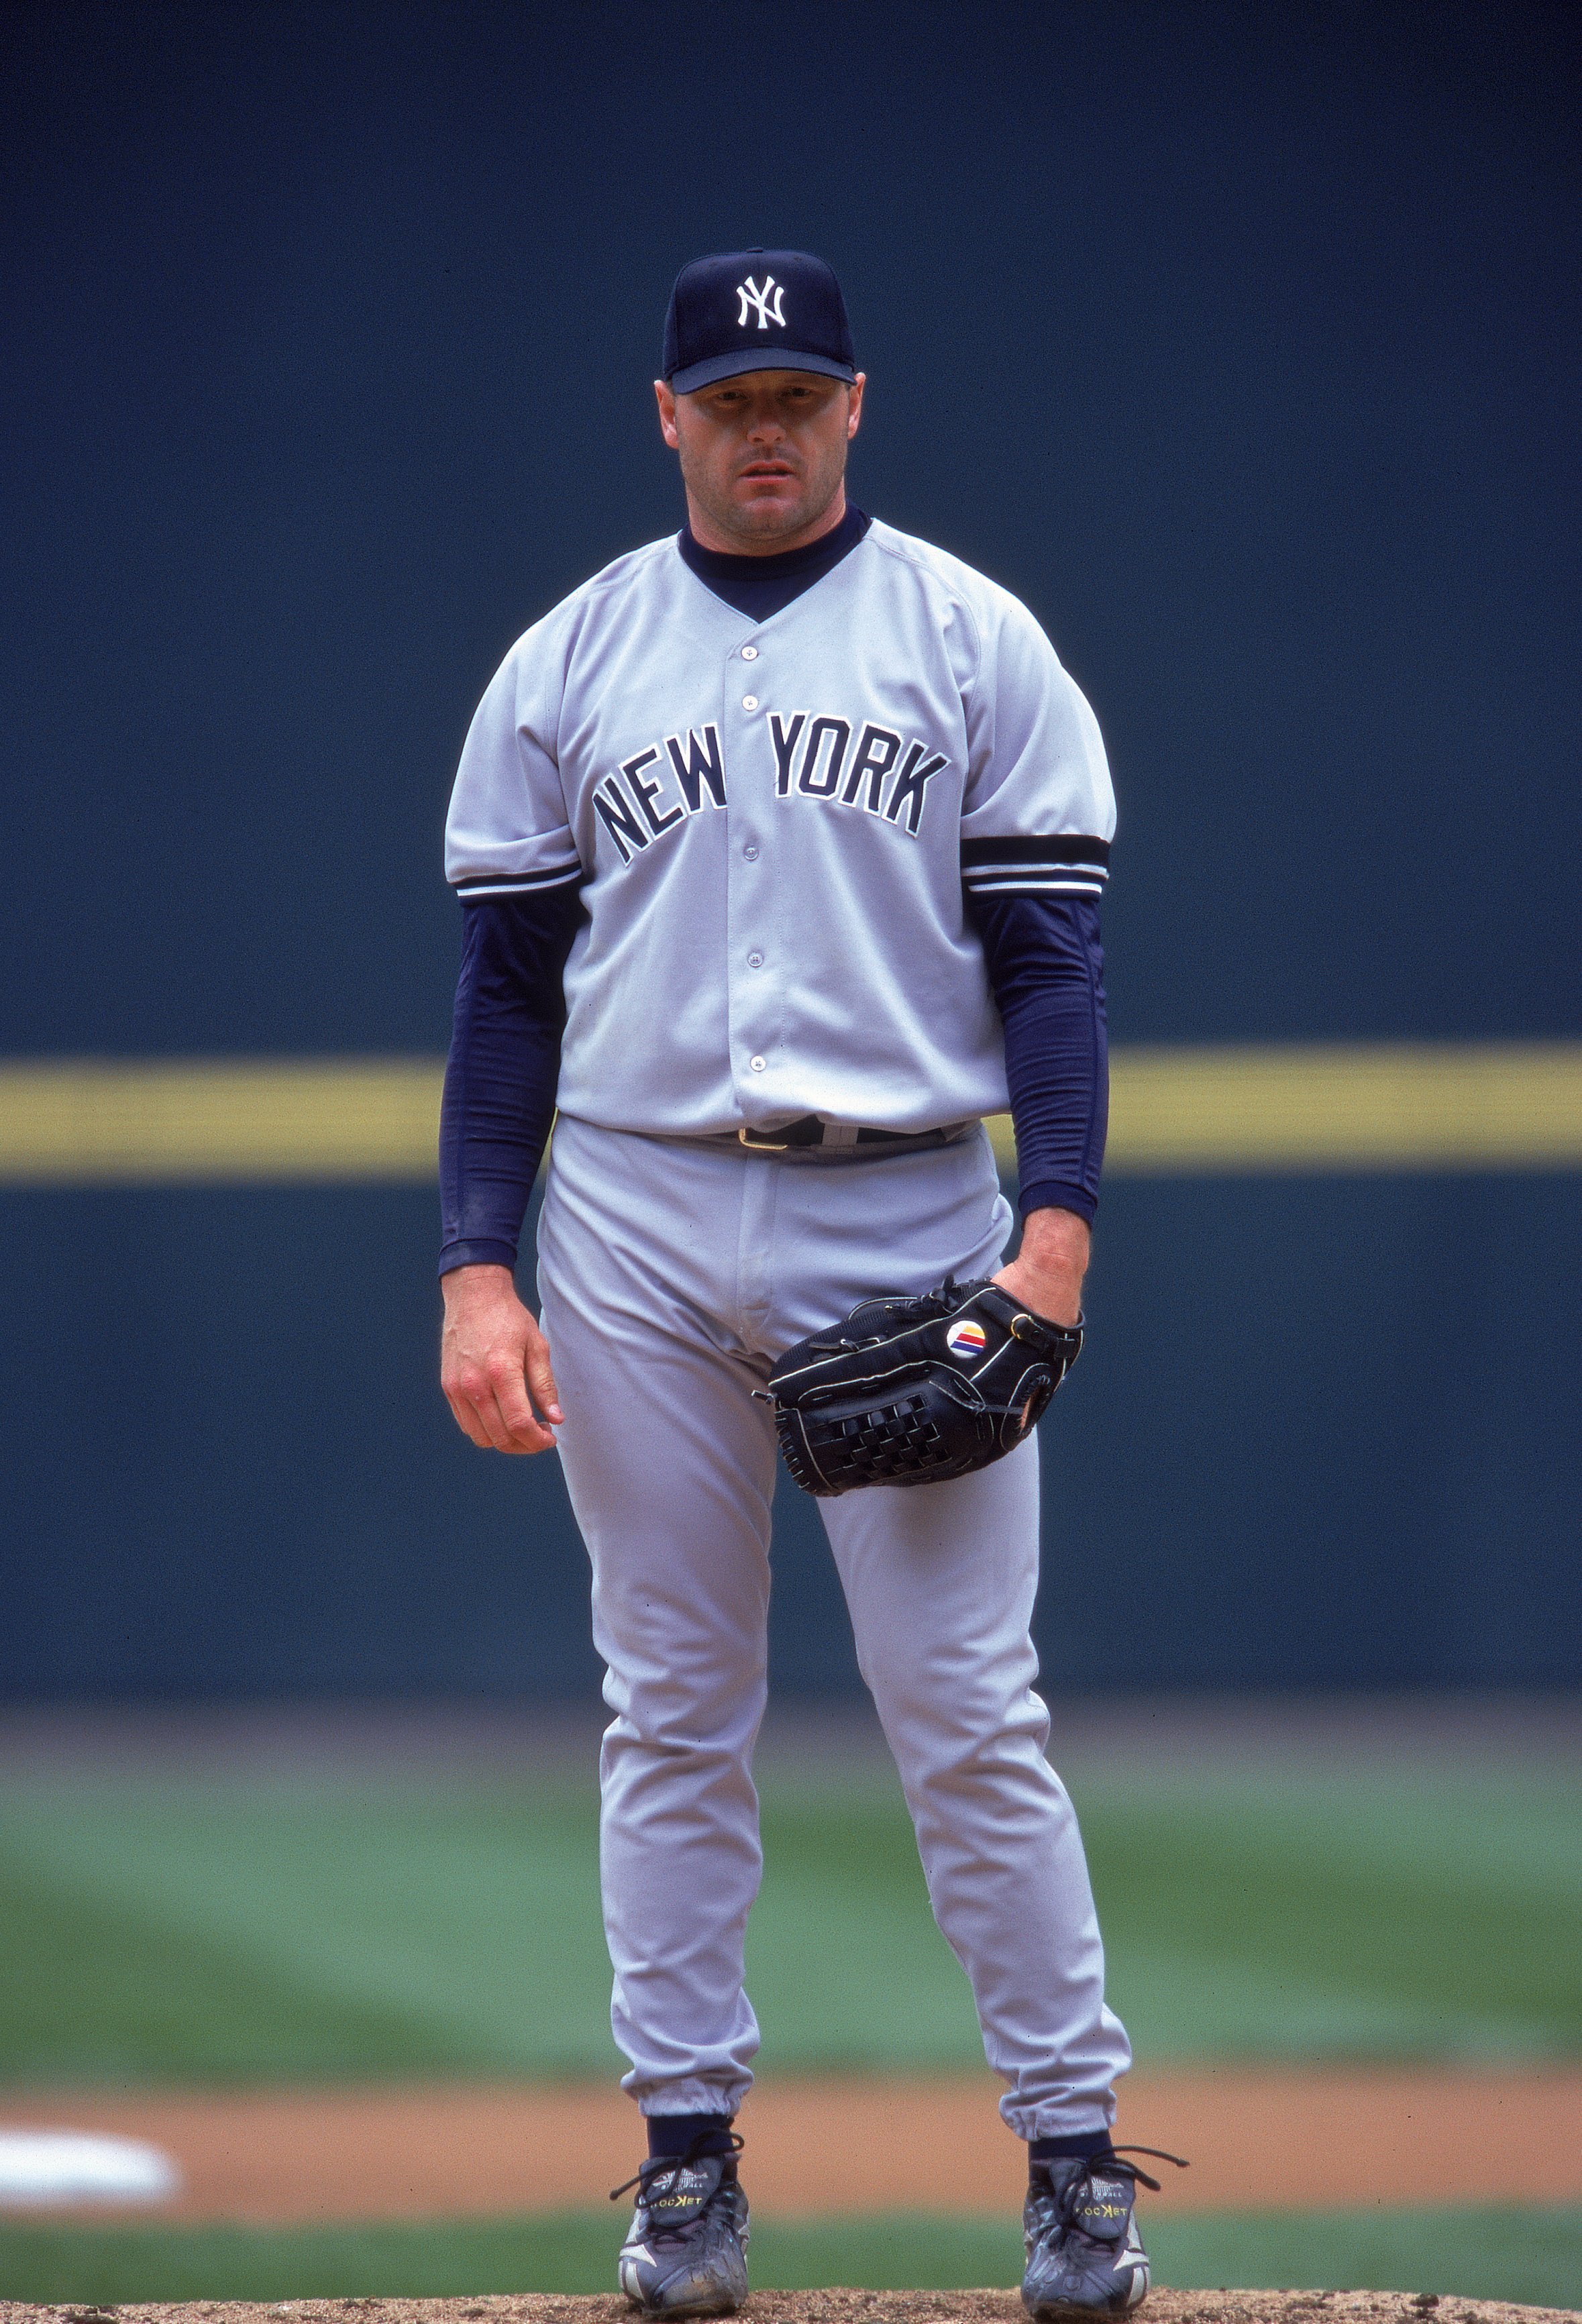 Roger Clemens, Biography, Stats, & Facts